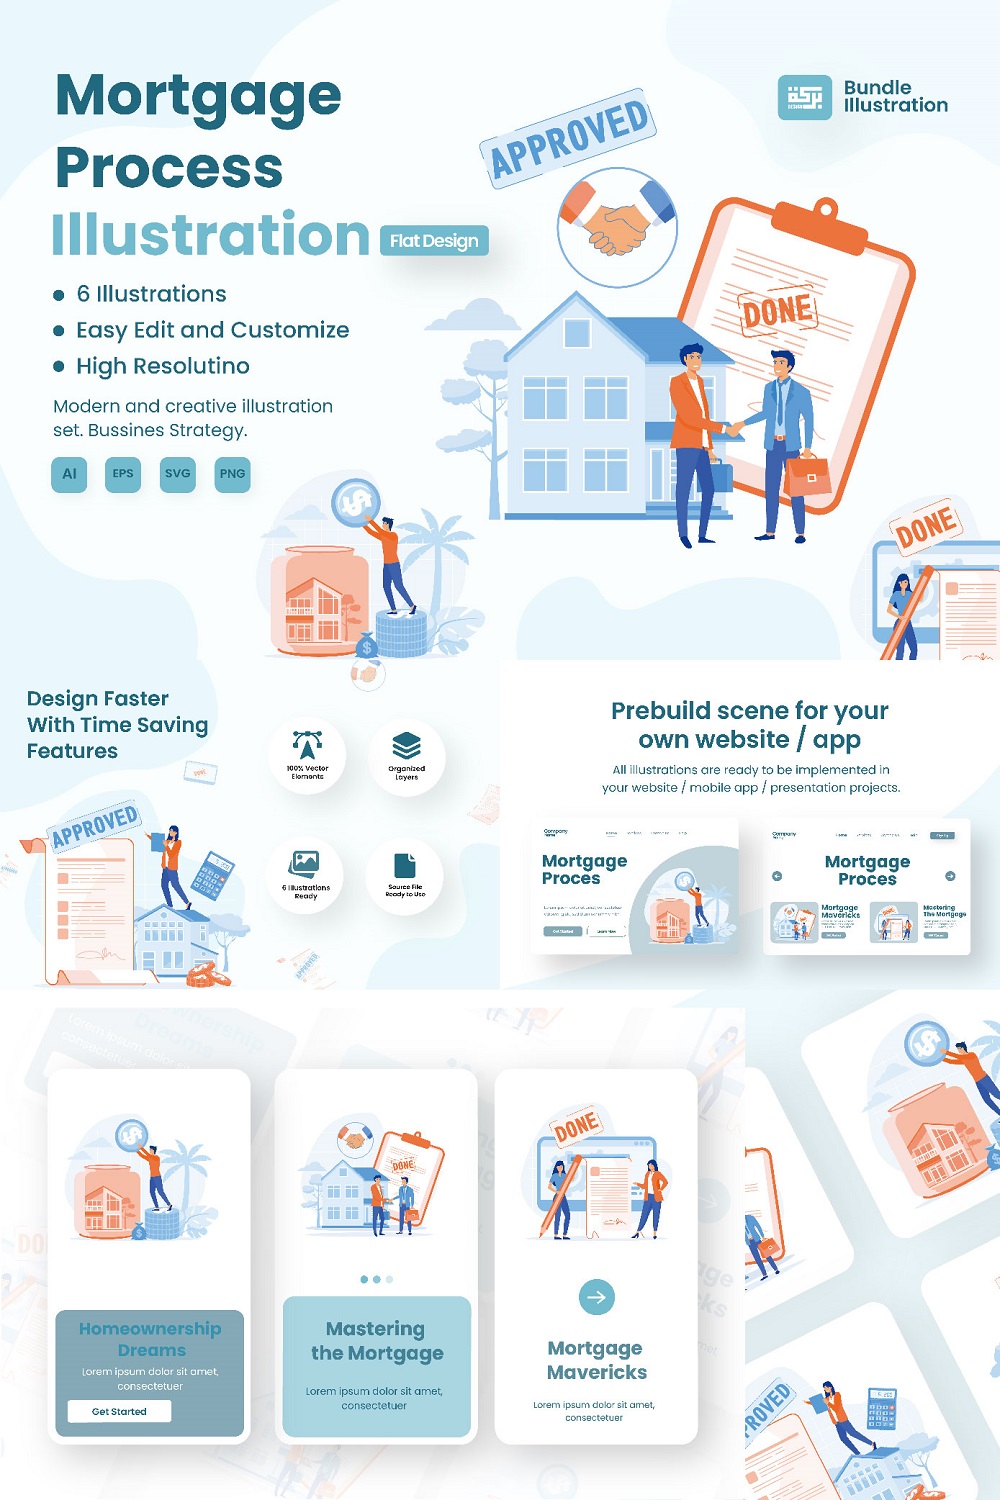 Illustration of Mortgage Purchase & Approval pinterest preview image.